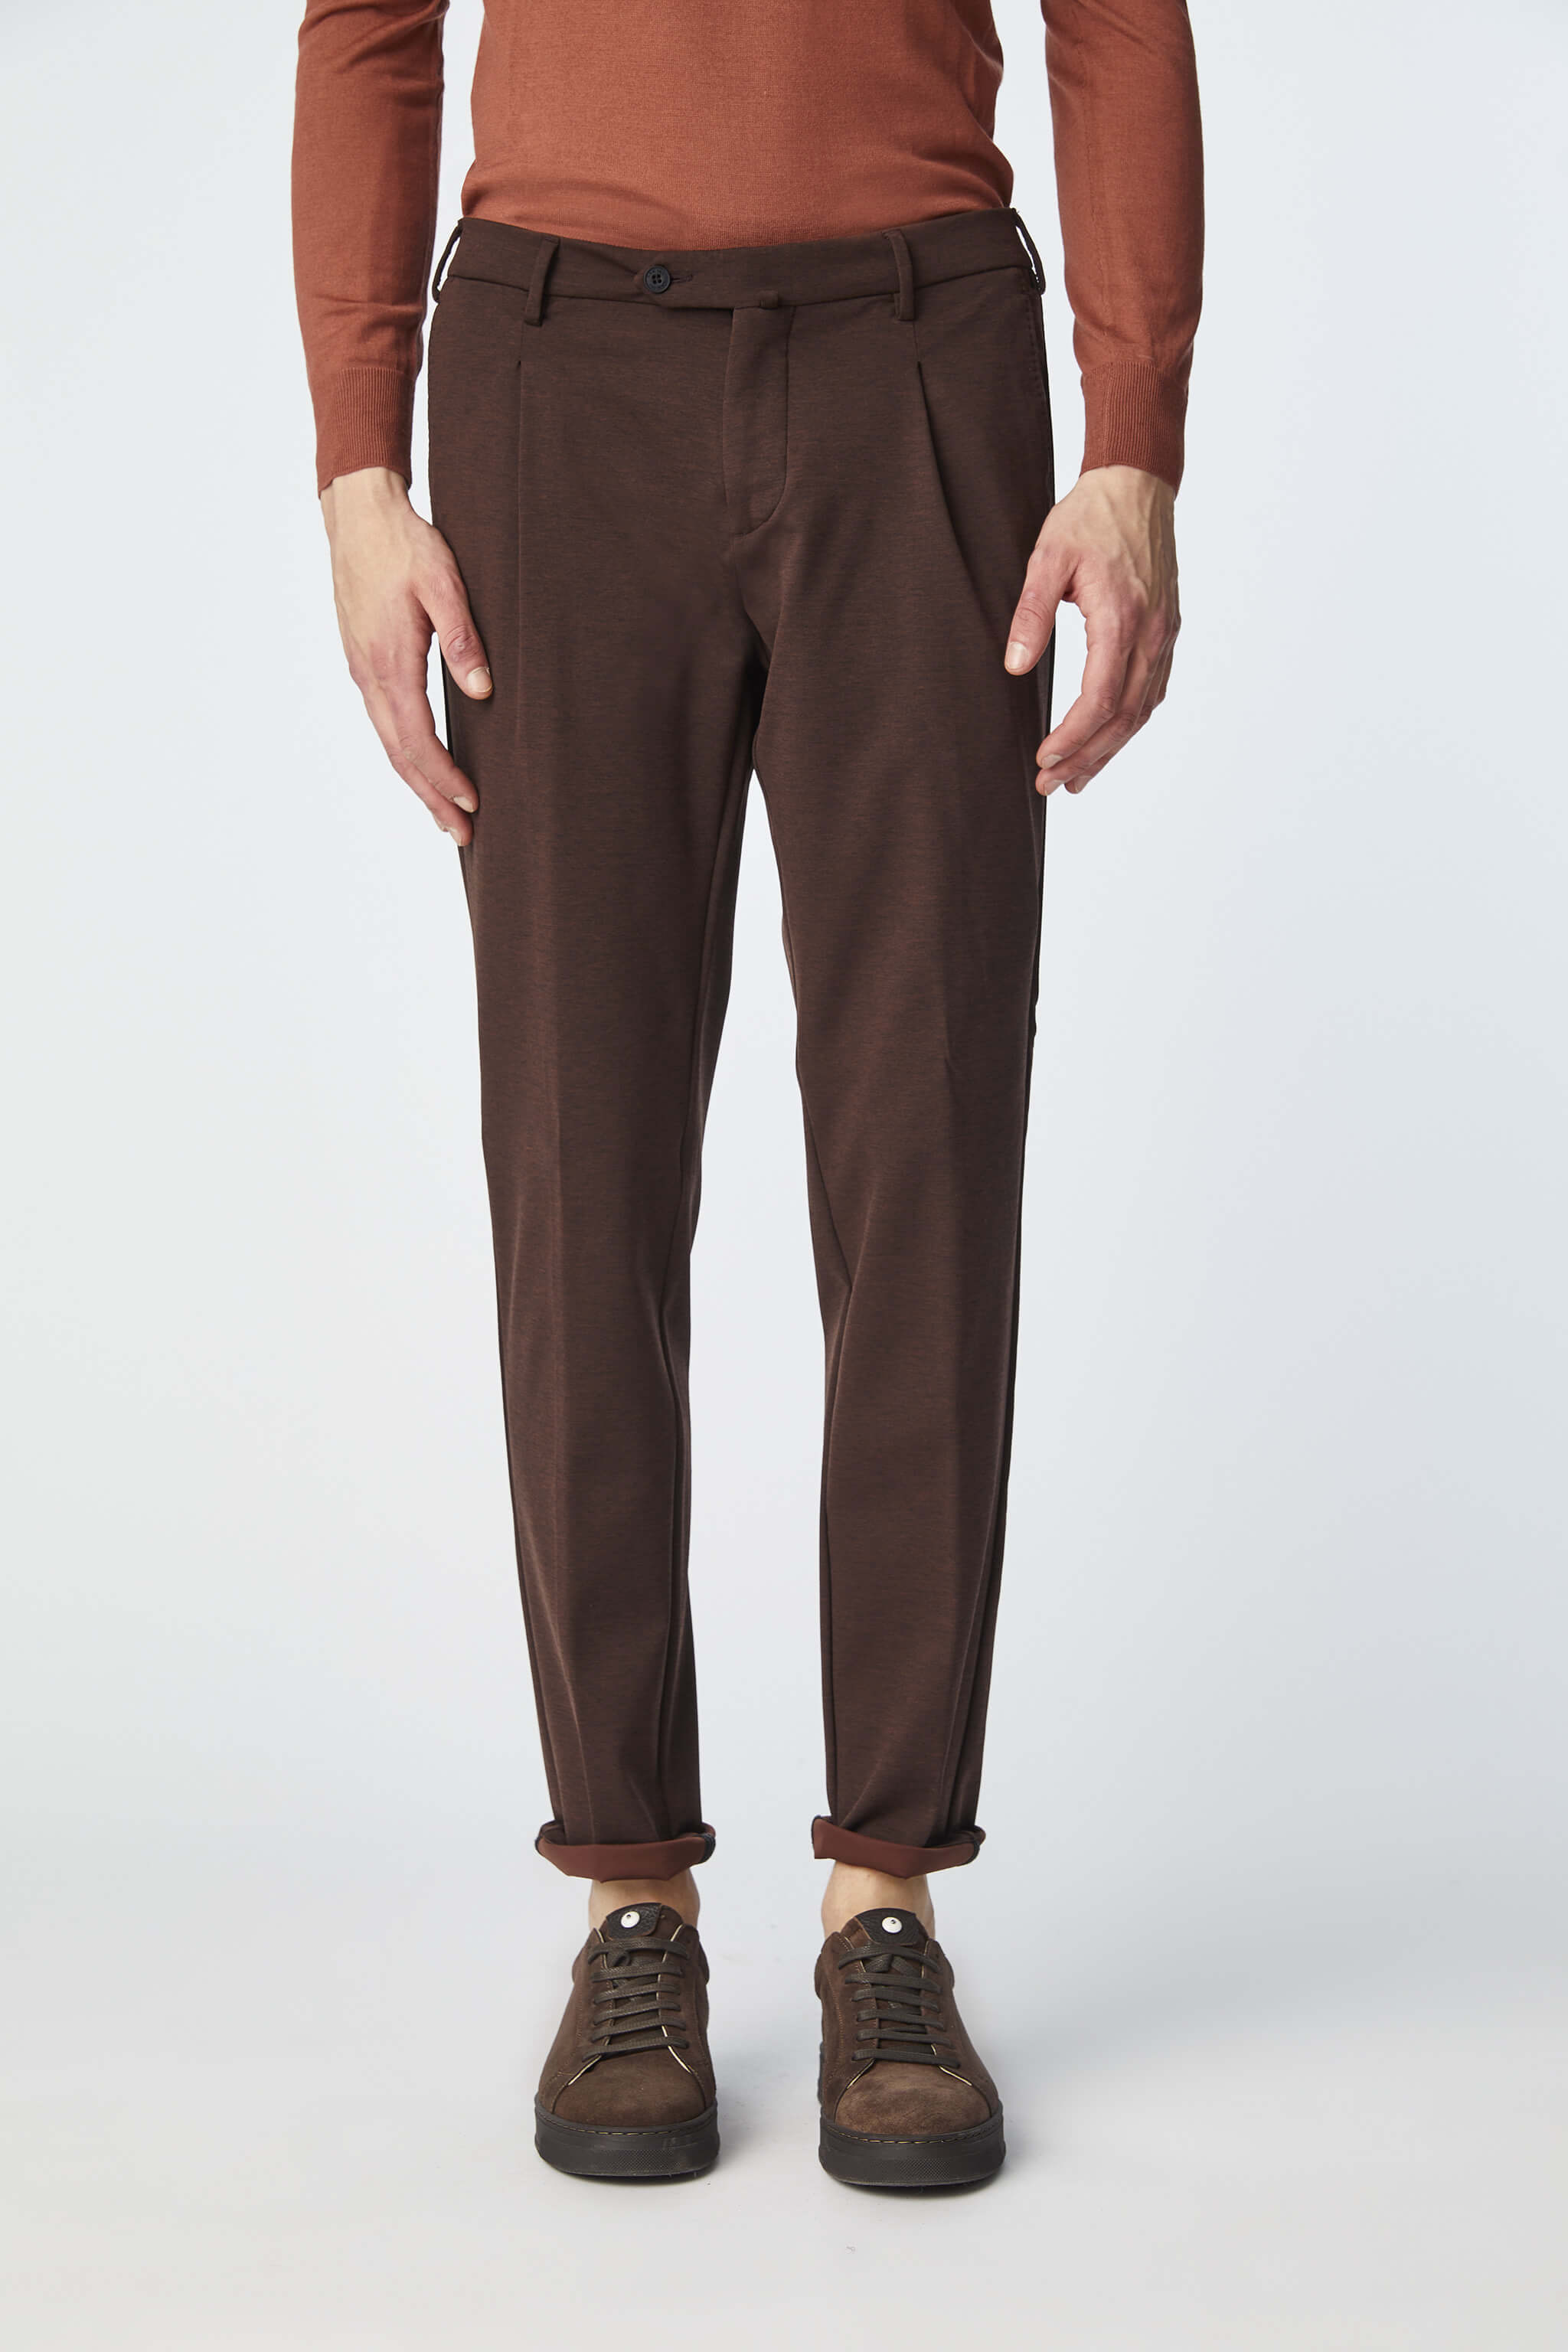 Garment-dyed technical jersey LIAM pant in brown